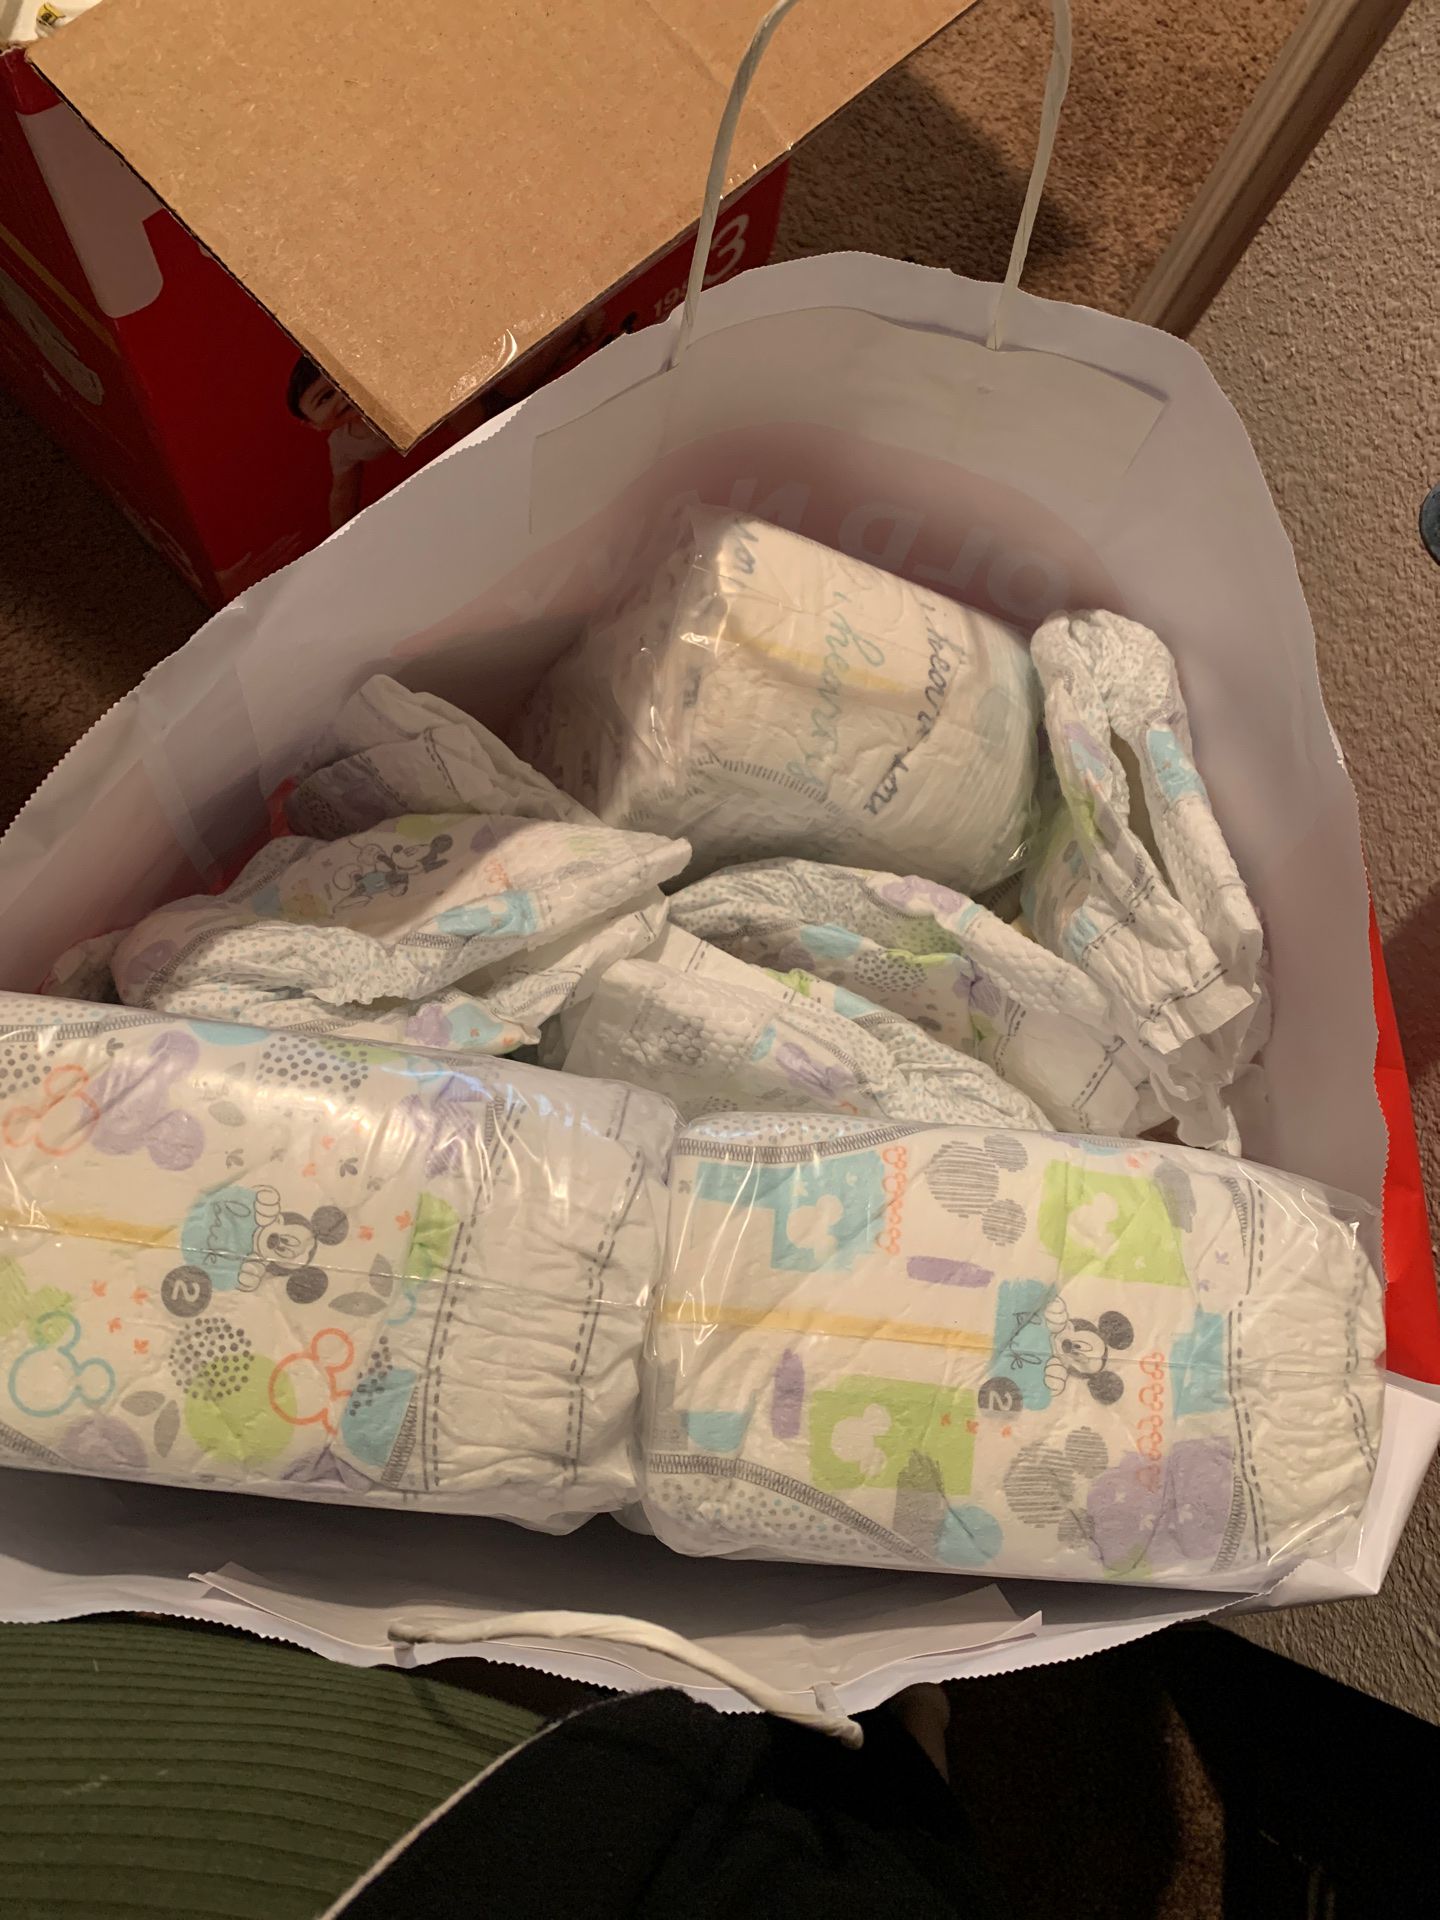 Newborn, size 1 and 2!huggies baby diapers